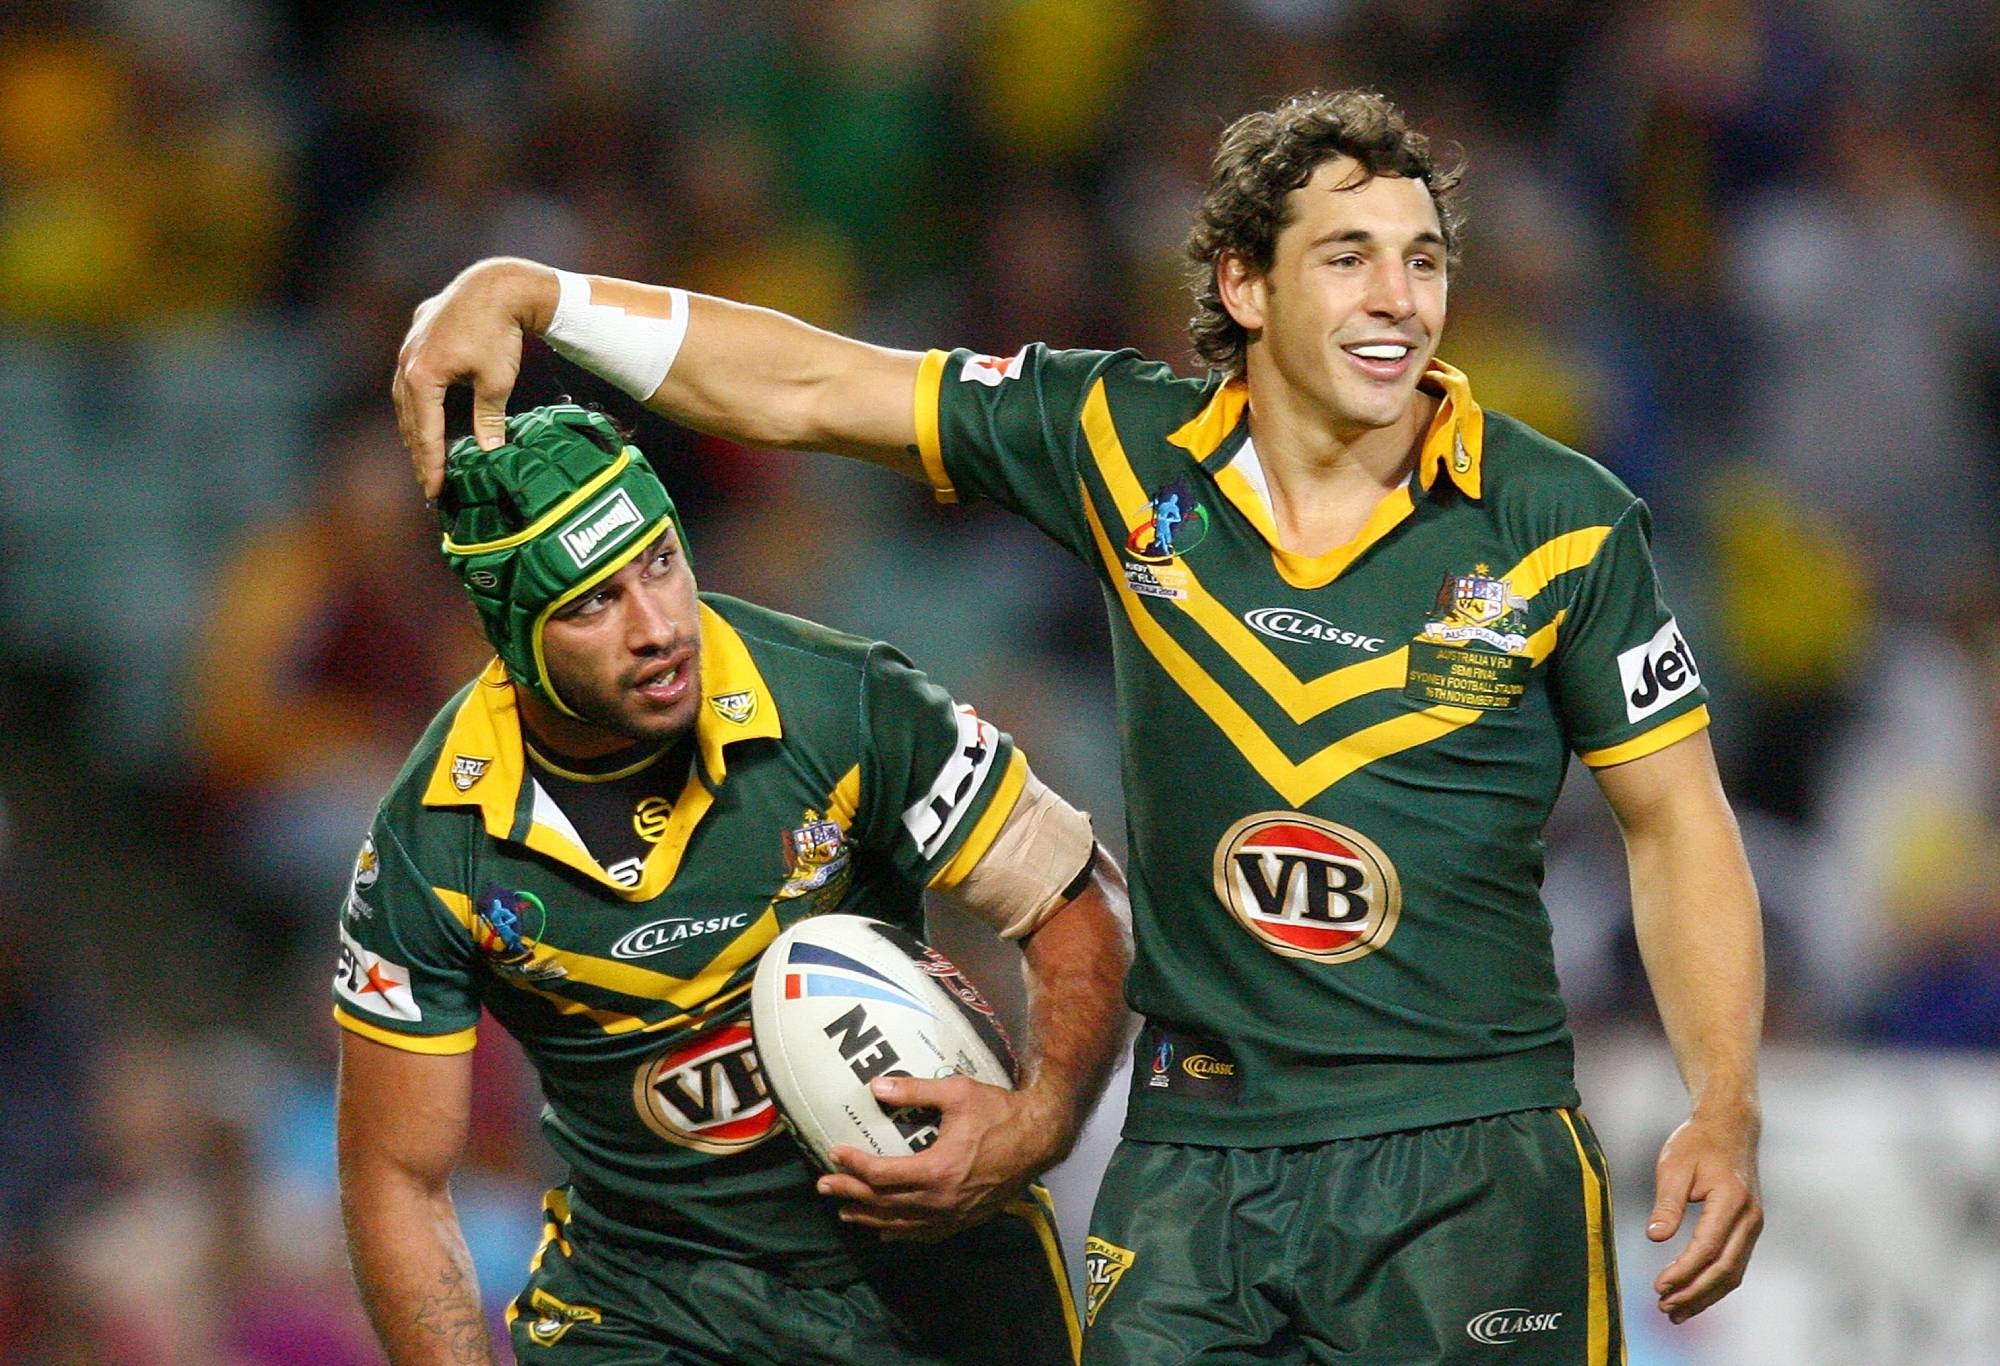 SYDNEY, AUSTRALIA - NOVEMBER 16: (L to R) Johnathan Thurston of Australia is congratulated by team mate Billy Slater after he scored during the 2008 Rugby League World Cup Semi Final match between the Australian Kangaroos and Fiji at the Sydney Football Stadium on November 16, 2008 in Sydney, Australia. (Photo by Mark Nolan/Getty Images)